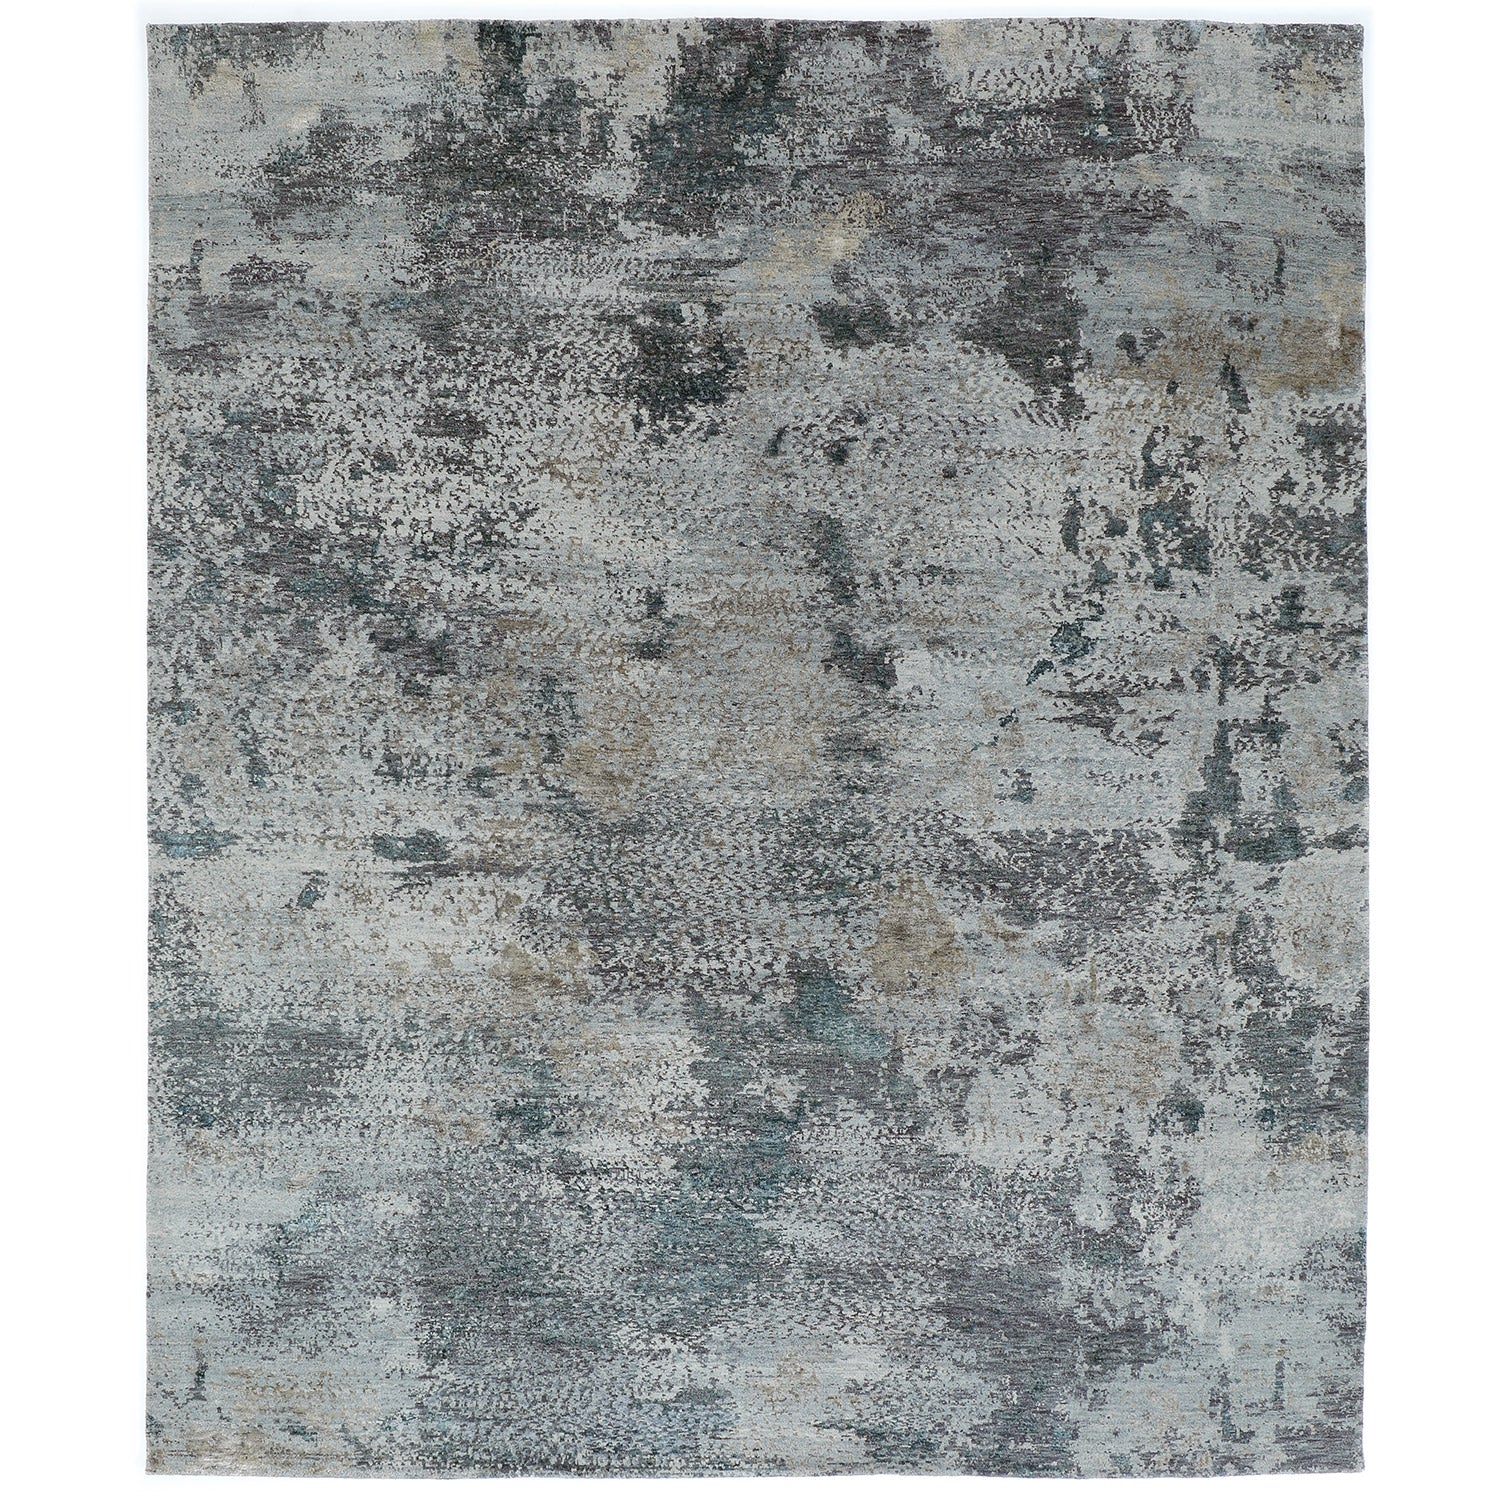 One-of-a-Kind, Hand-Knotted Area Rug - Gray 8'0" x 9'10" Default Title